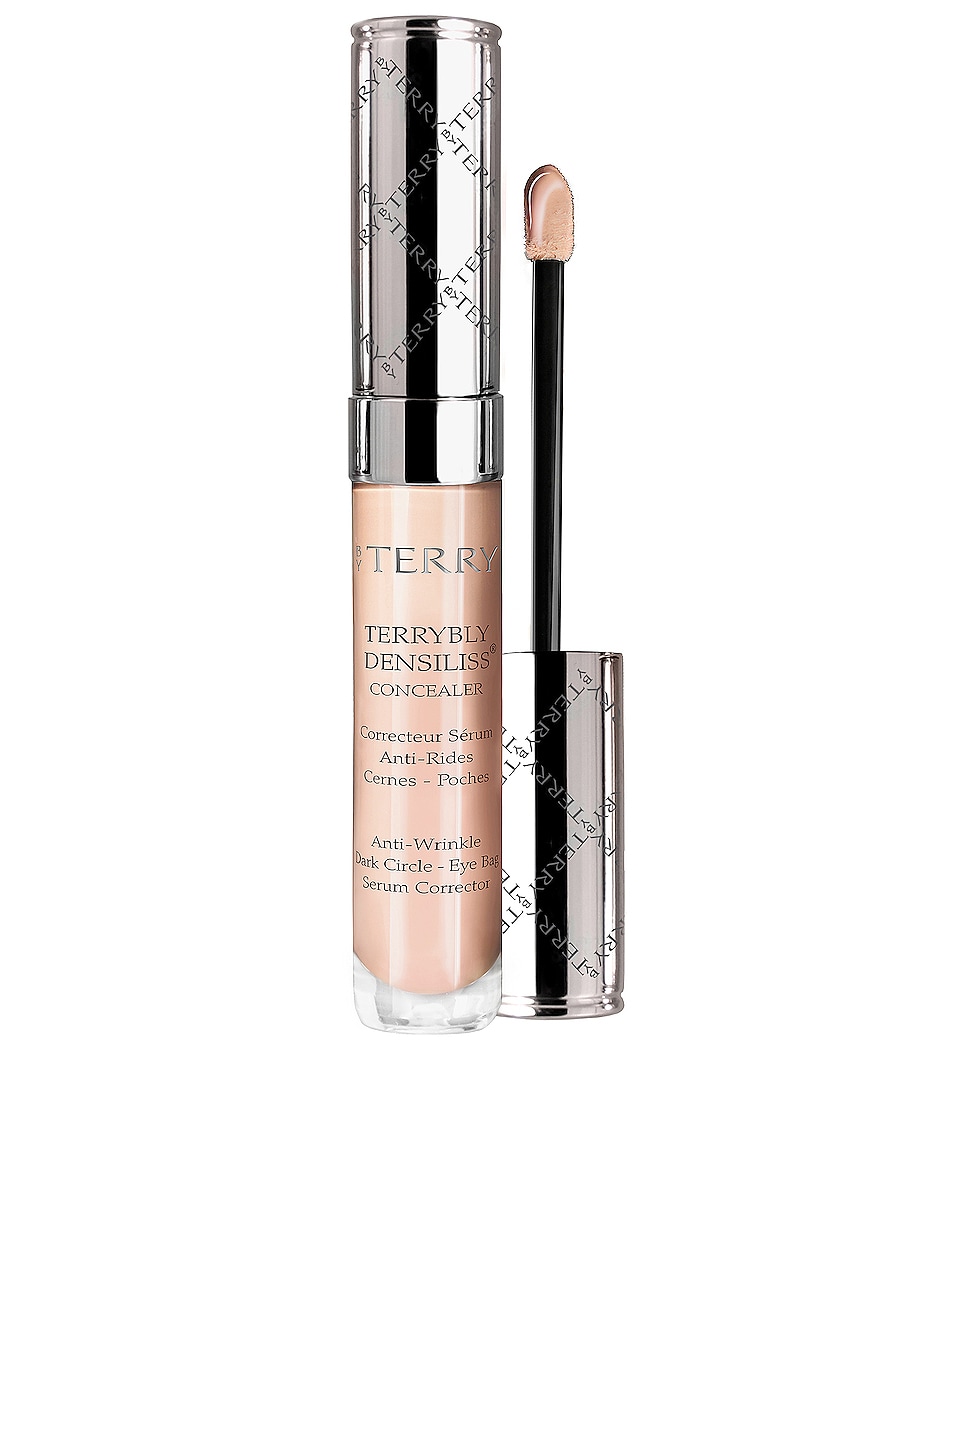 Консилер By Terry Terrybly Densiliss, цвет Fresh Fair by terry консилер terrybly densiliss concealer оттенок 6 sienna coper